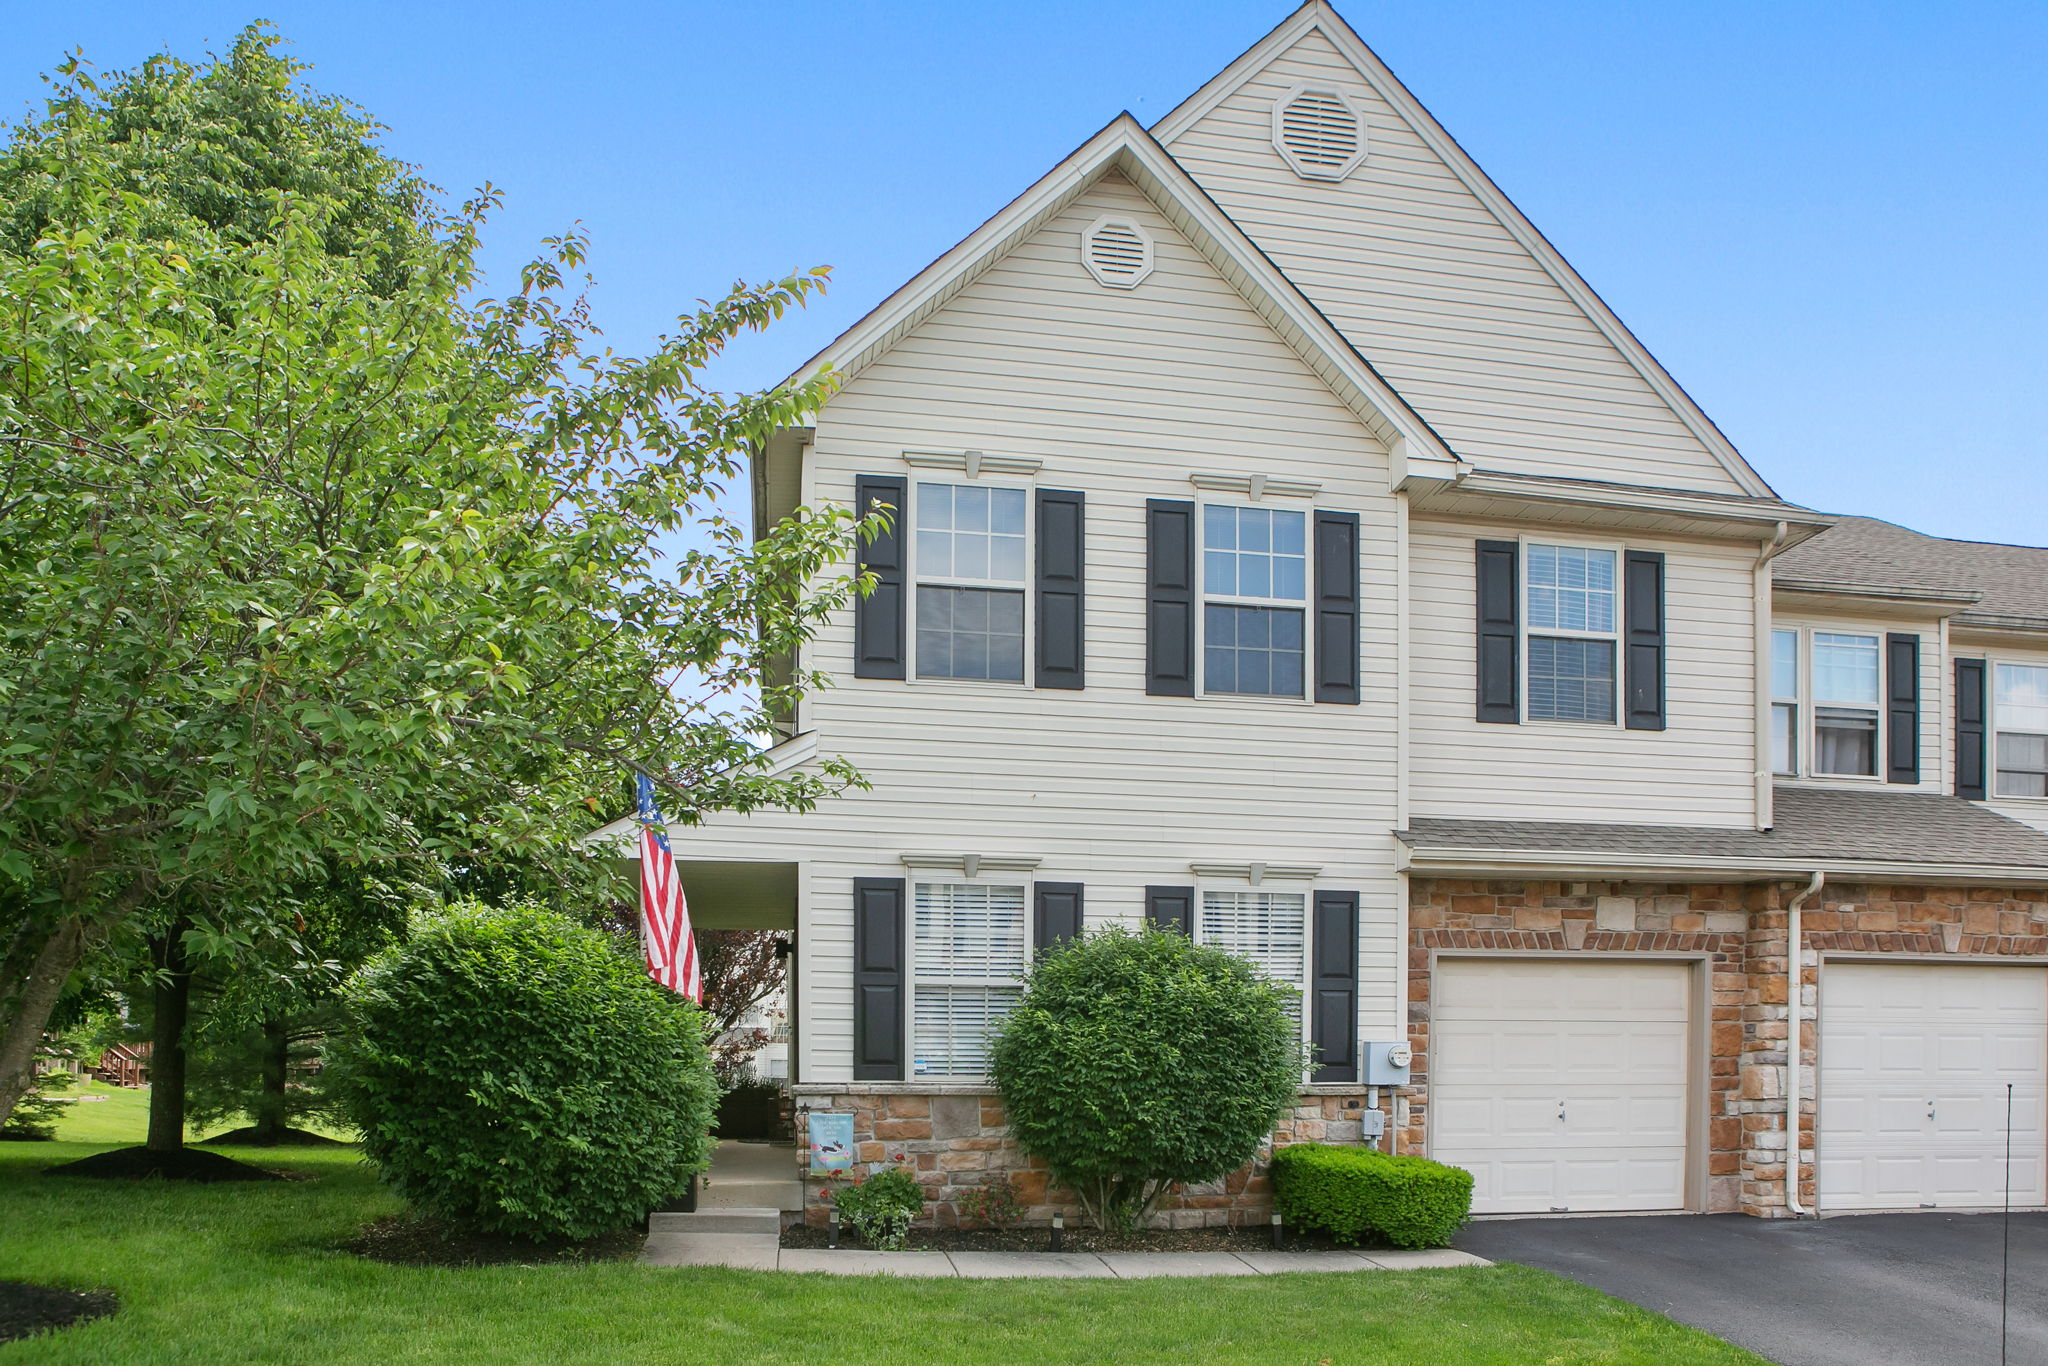  4701 Waterford Way, Royersford, PA 19468, US